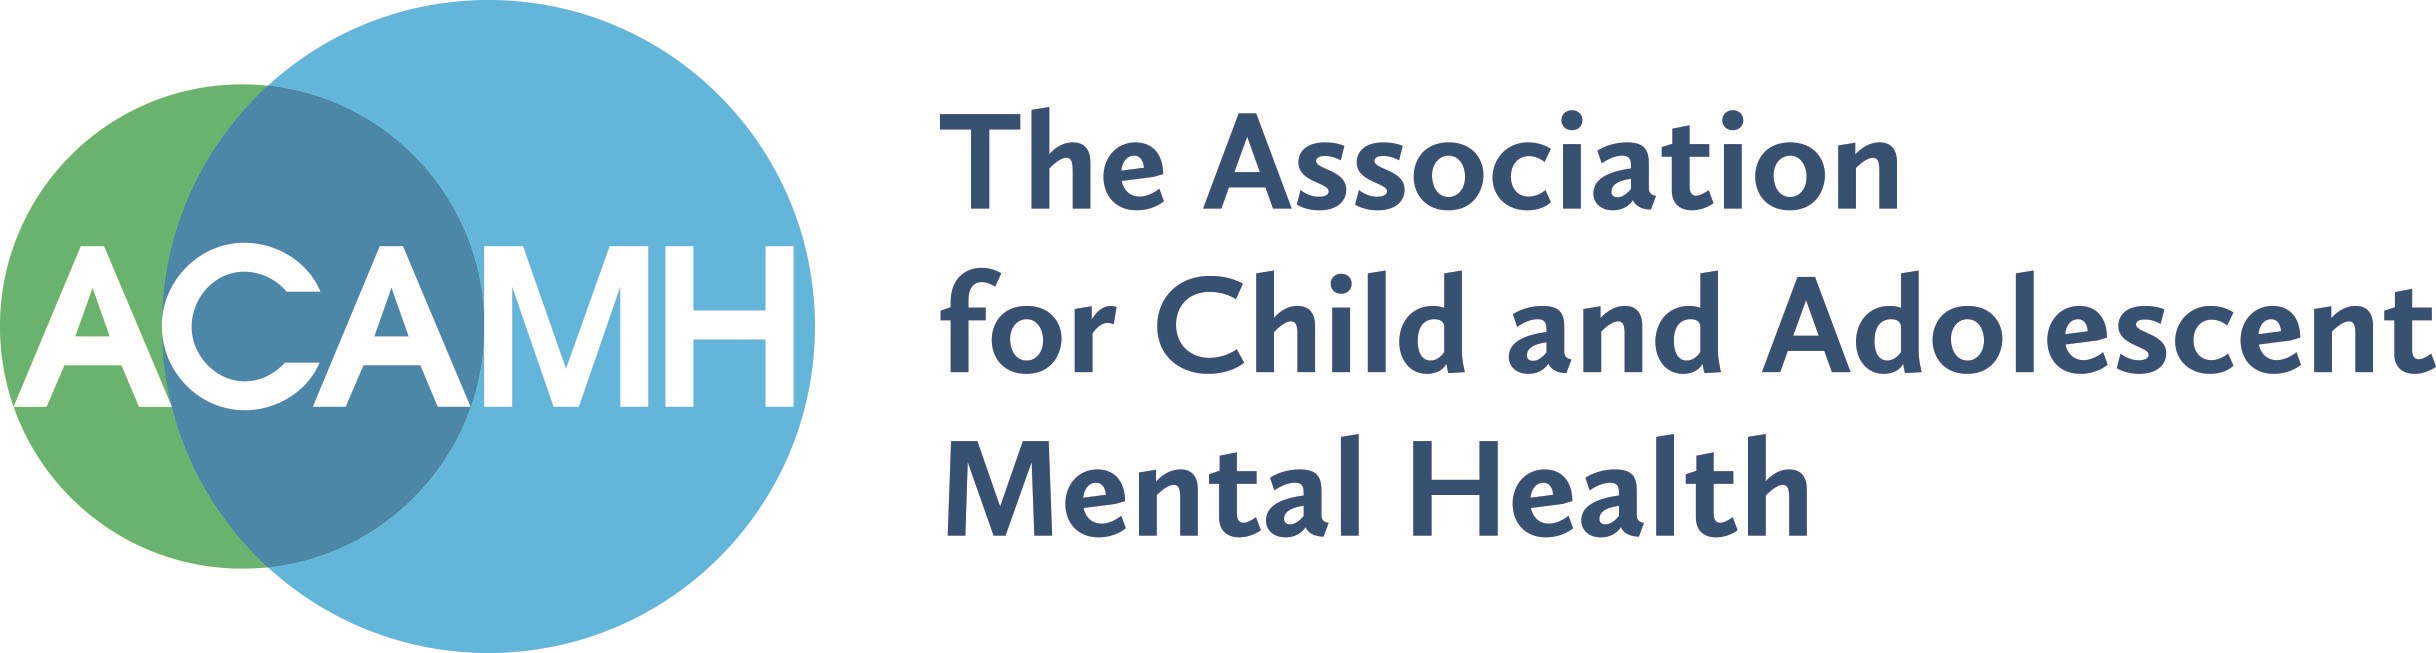 The Association for Child and Adolescent Mental Health